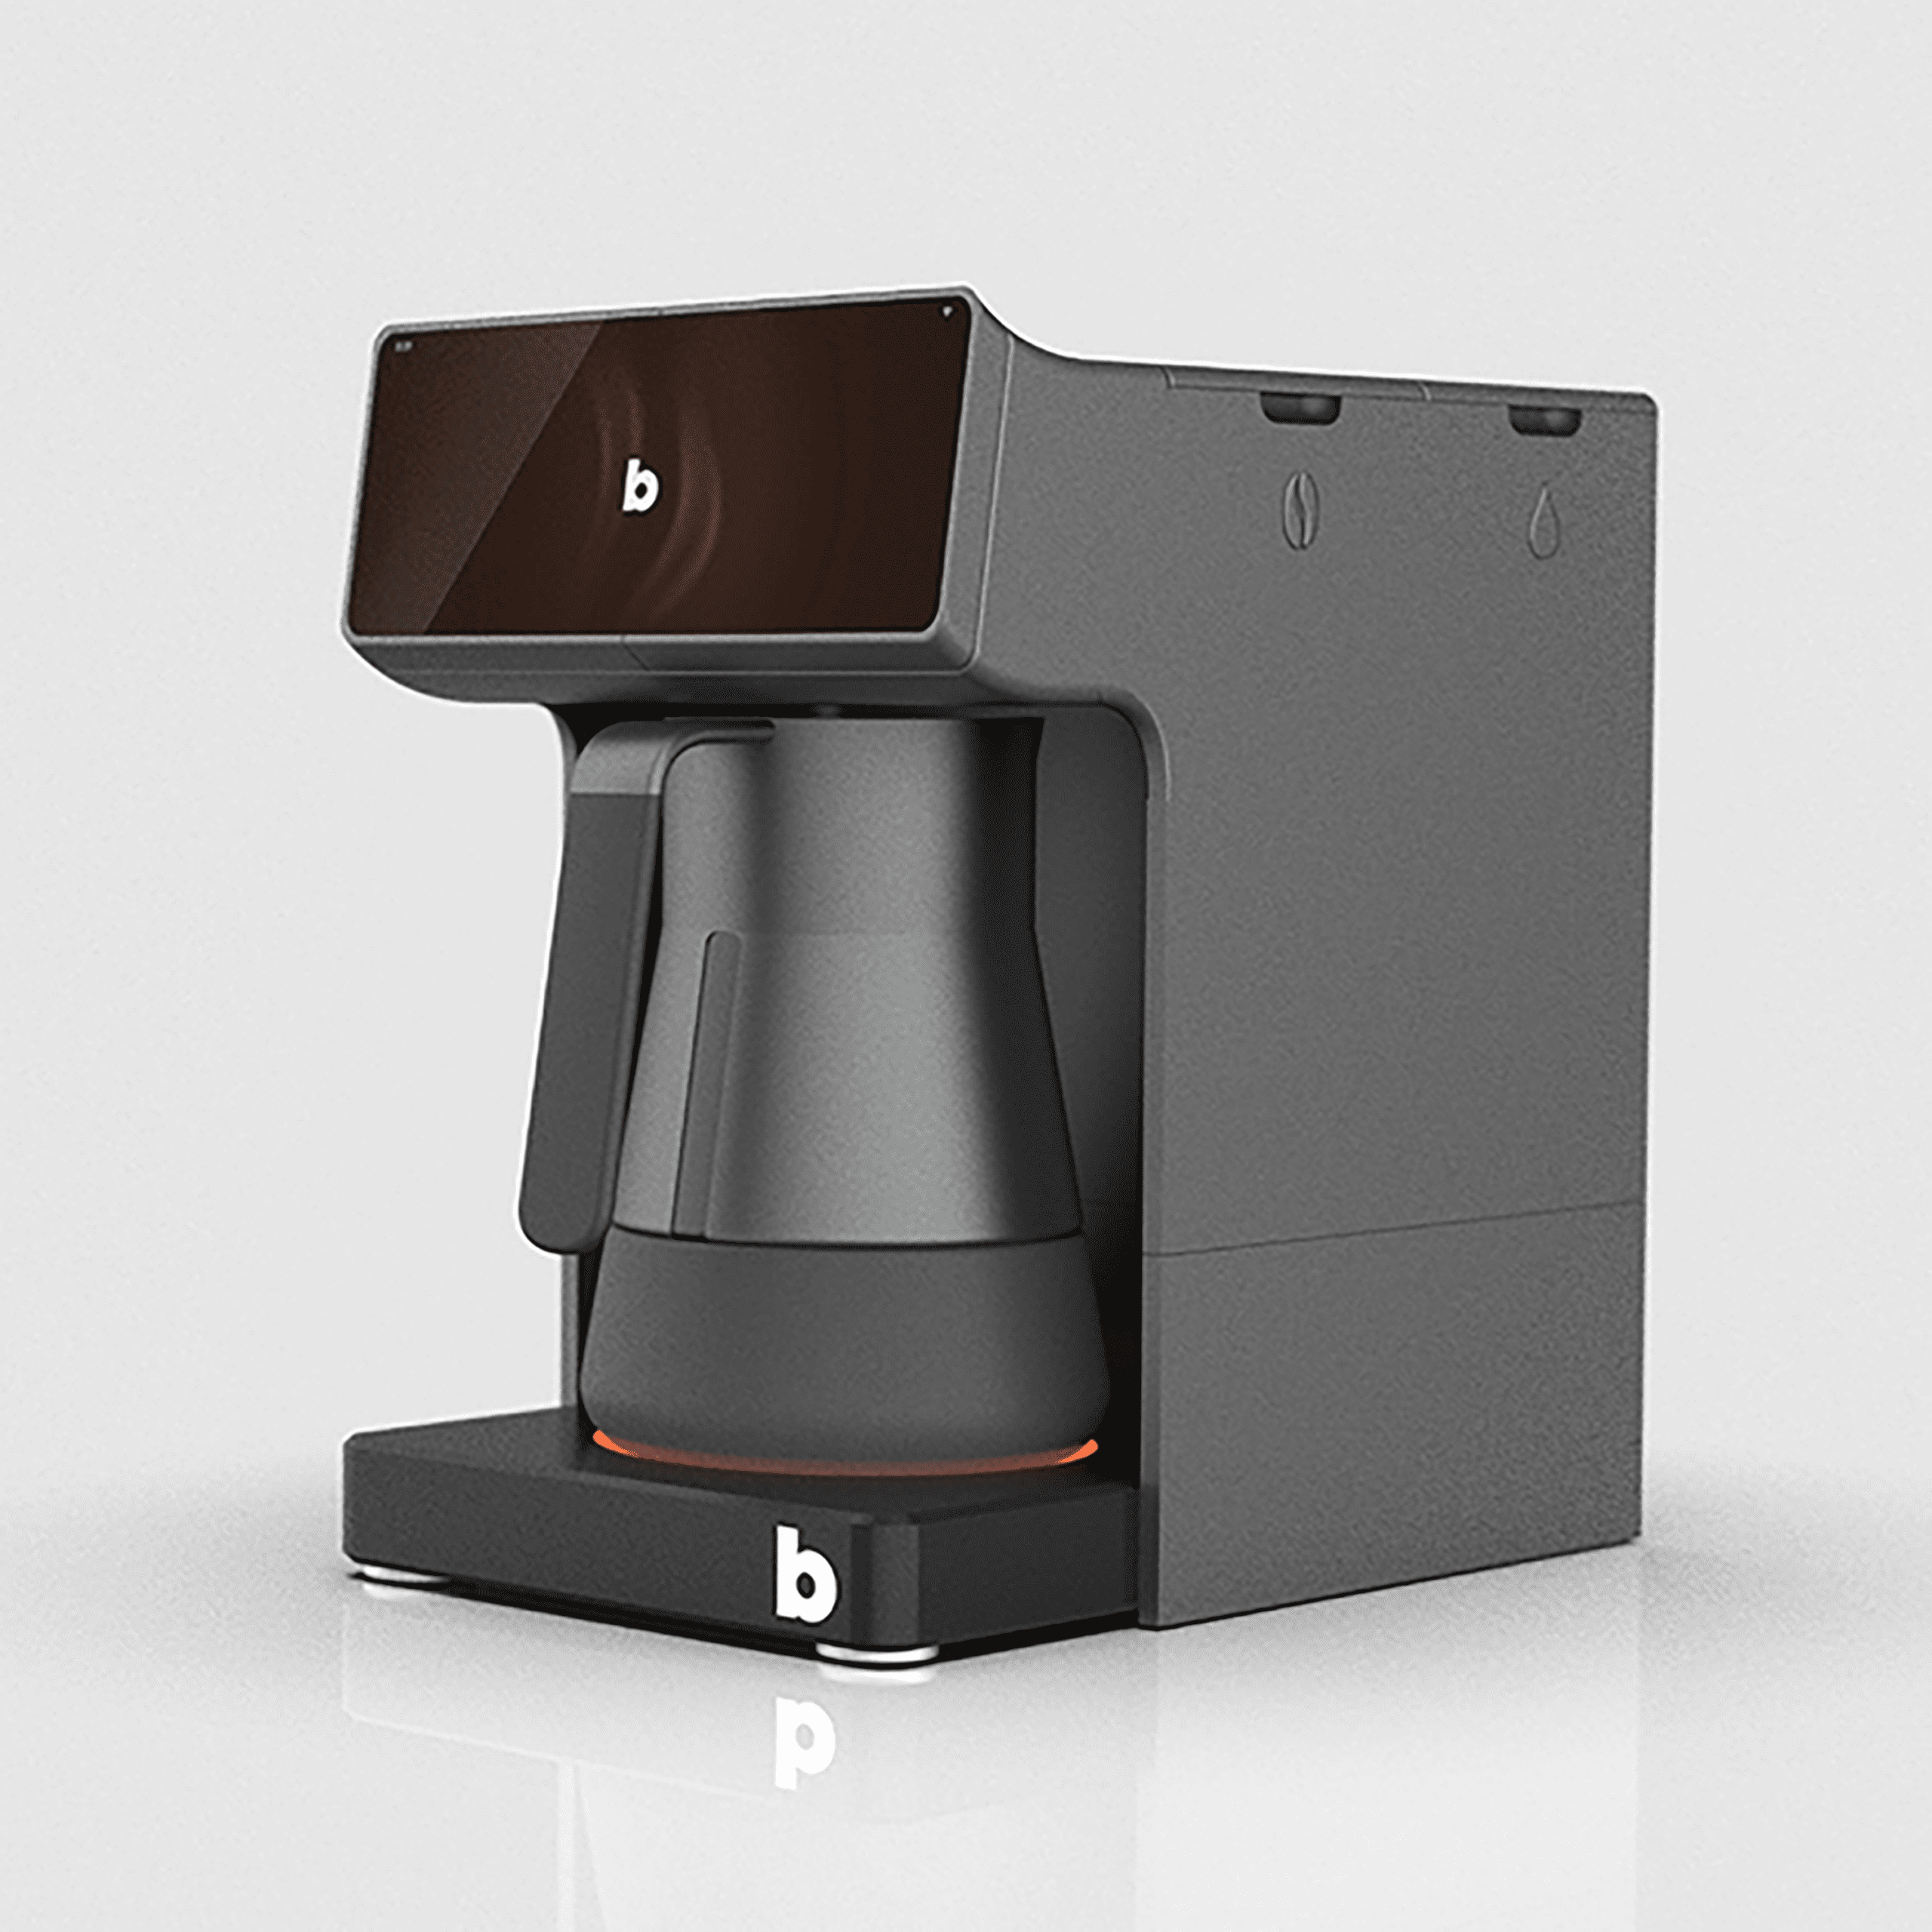 Digital image of a minimalist Bevo coffee maker. The coffee maker is black and boxy, with a brown panel on the top with a white "B" logo in the center. There is also a white logo at the base. A tall shiny black pot sits inside on a glowing orange heating pad.